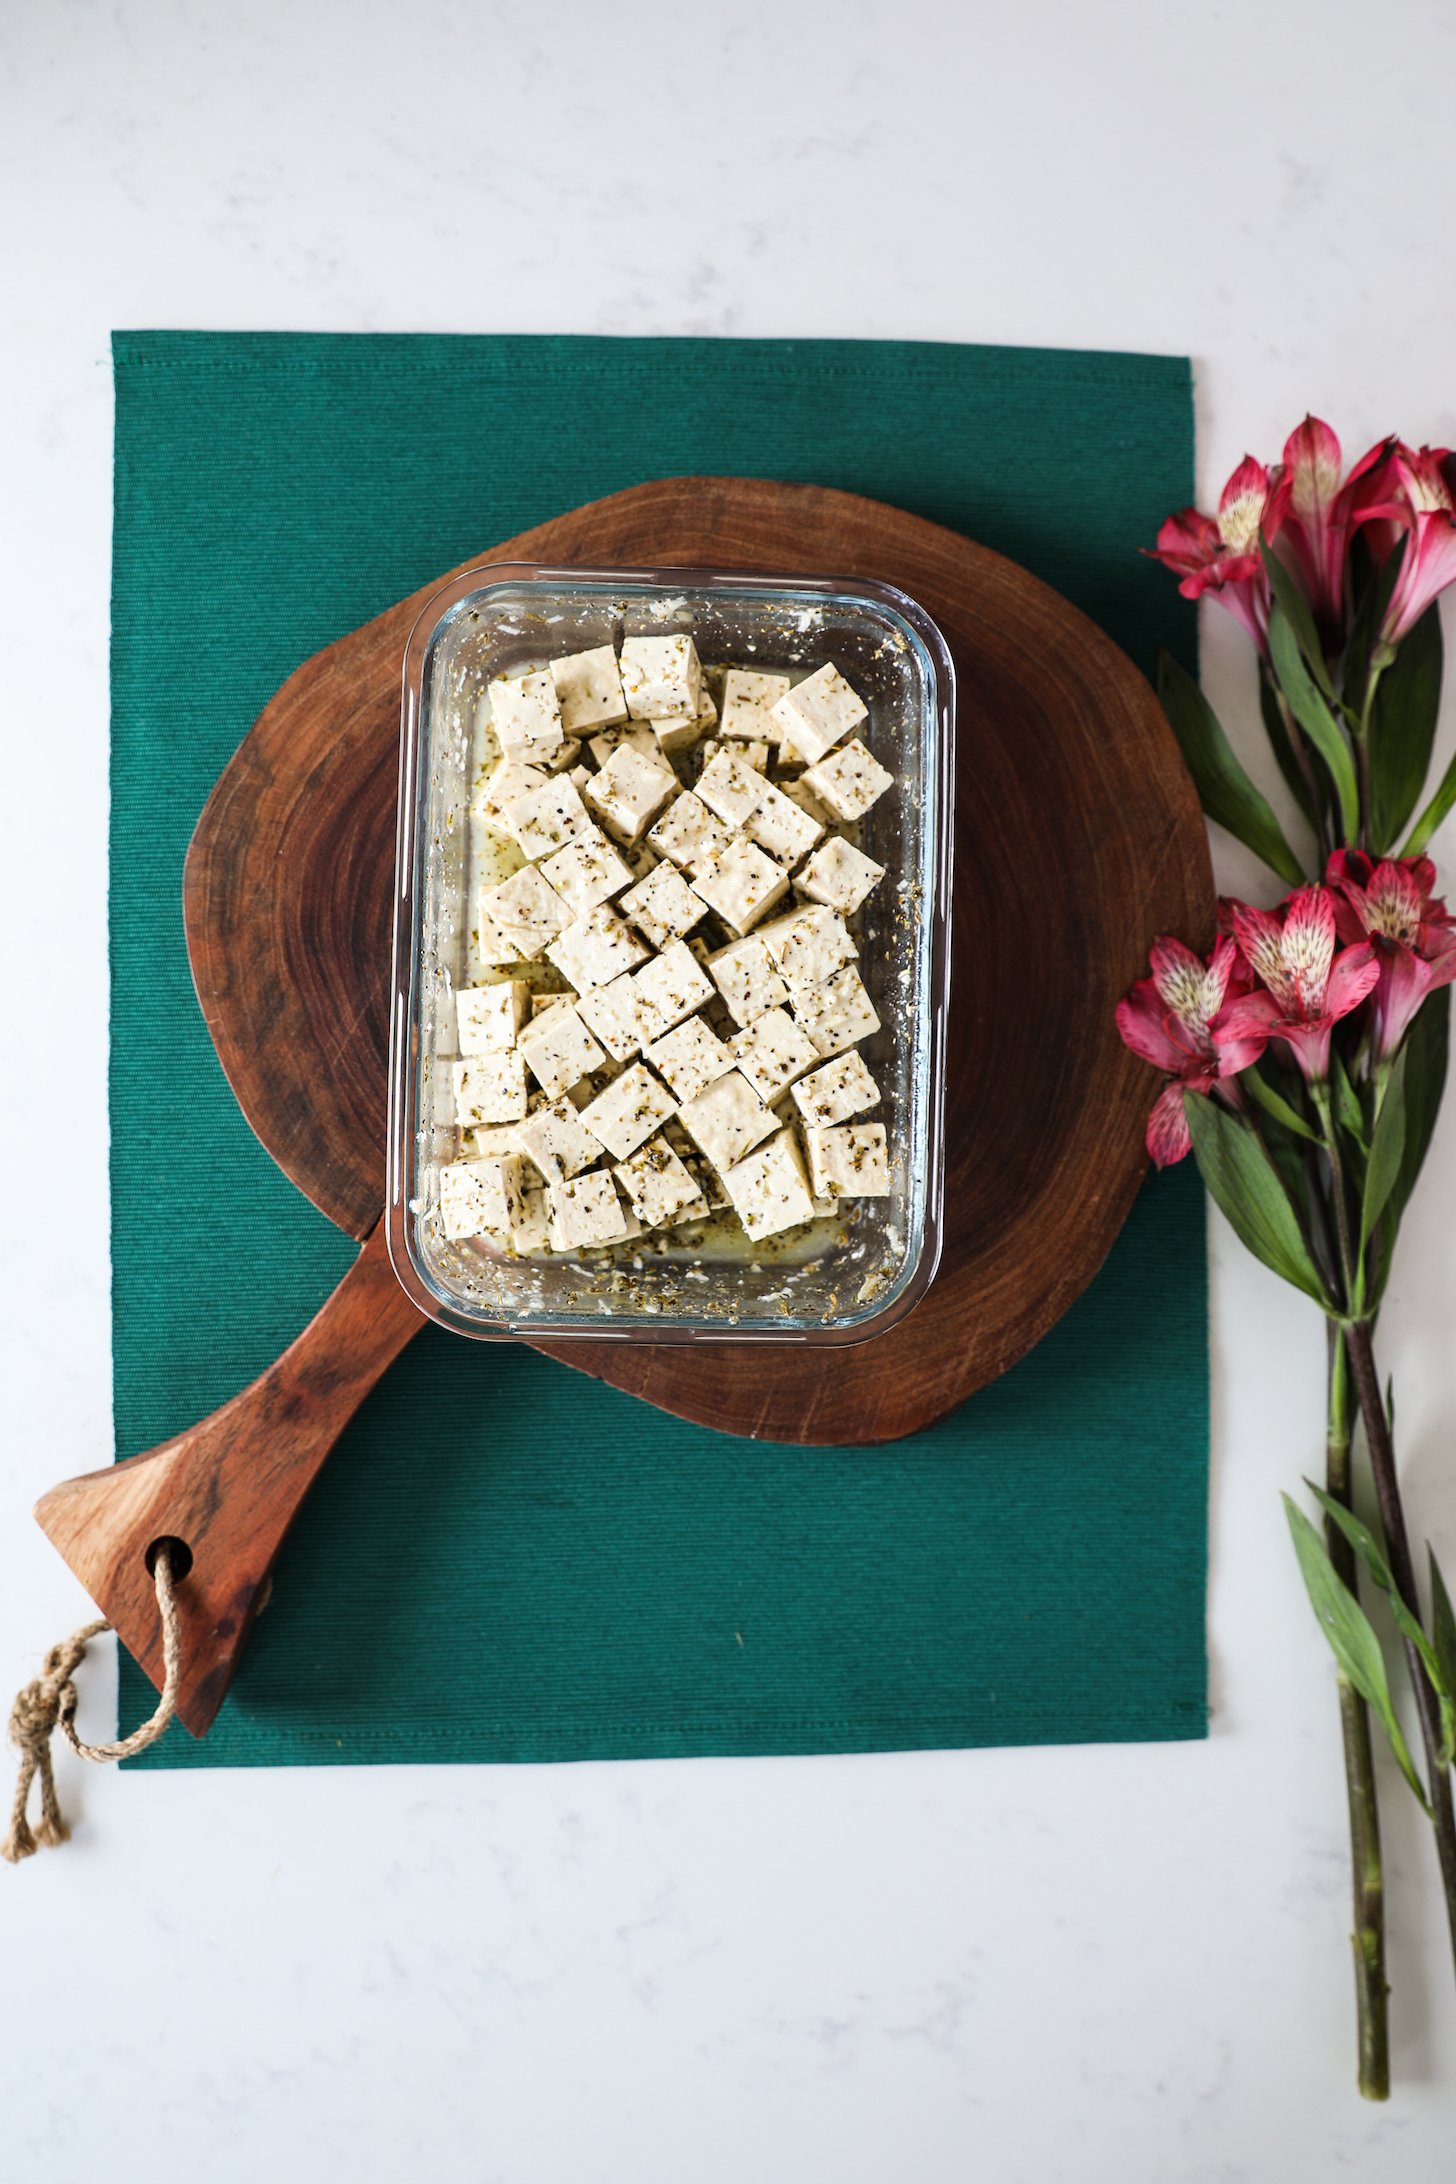 Top view of a container with marinated cubes of tofu with flower stems nearby.